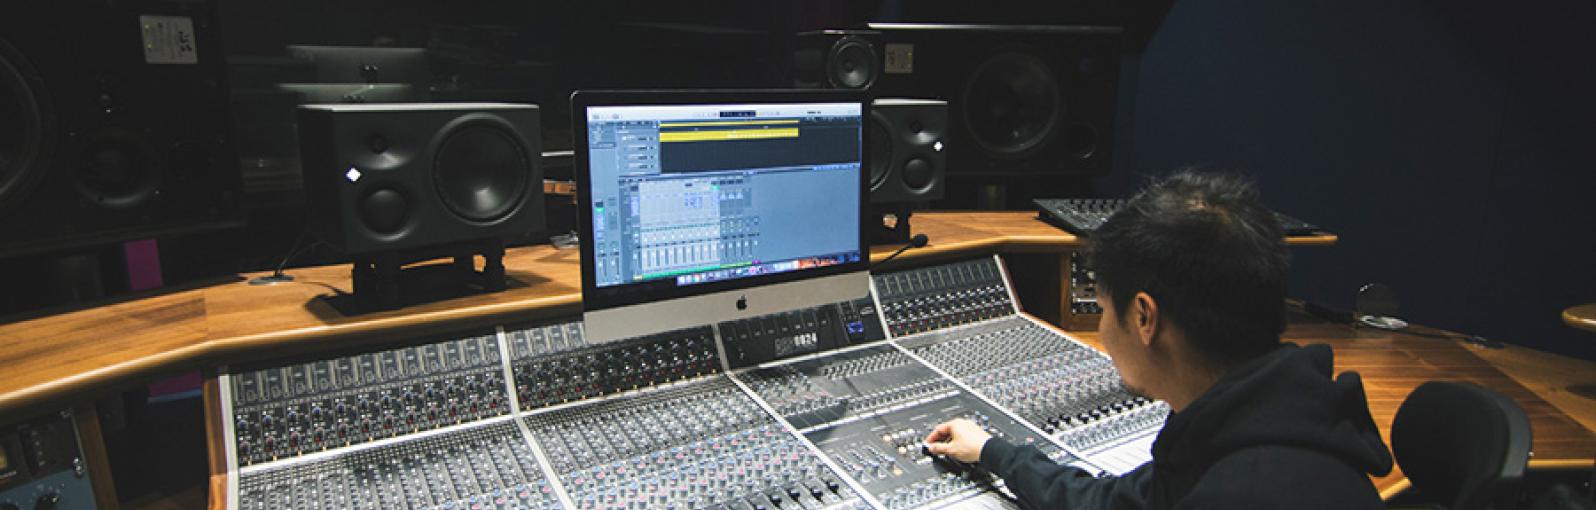 Salford music degree student sitting by high-tech recording equipment in the university’s recording studio facilities.